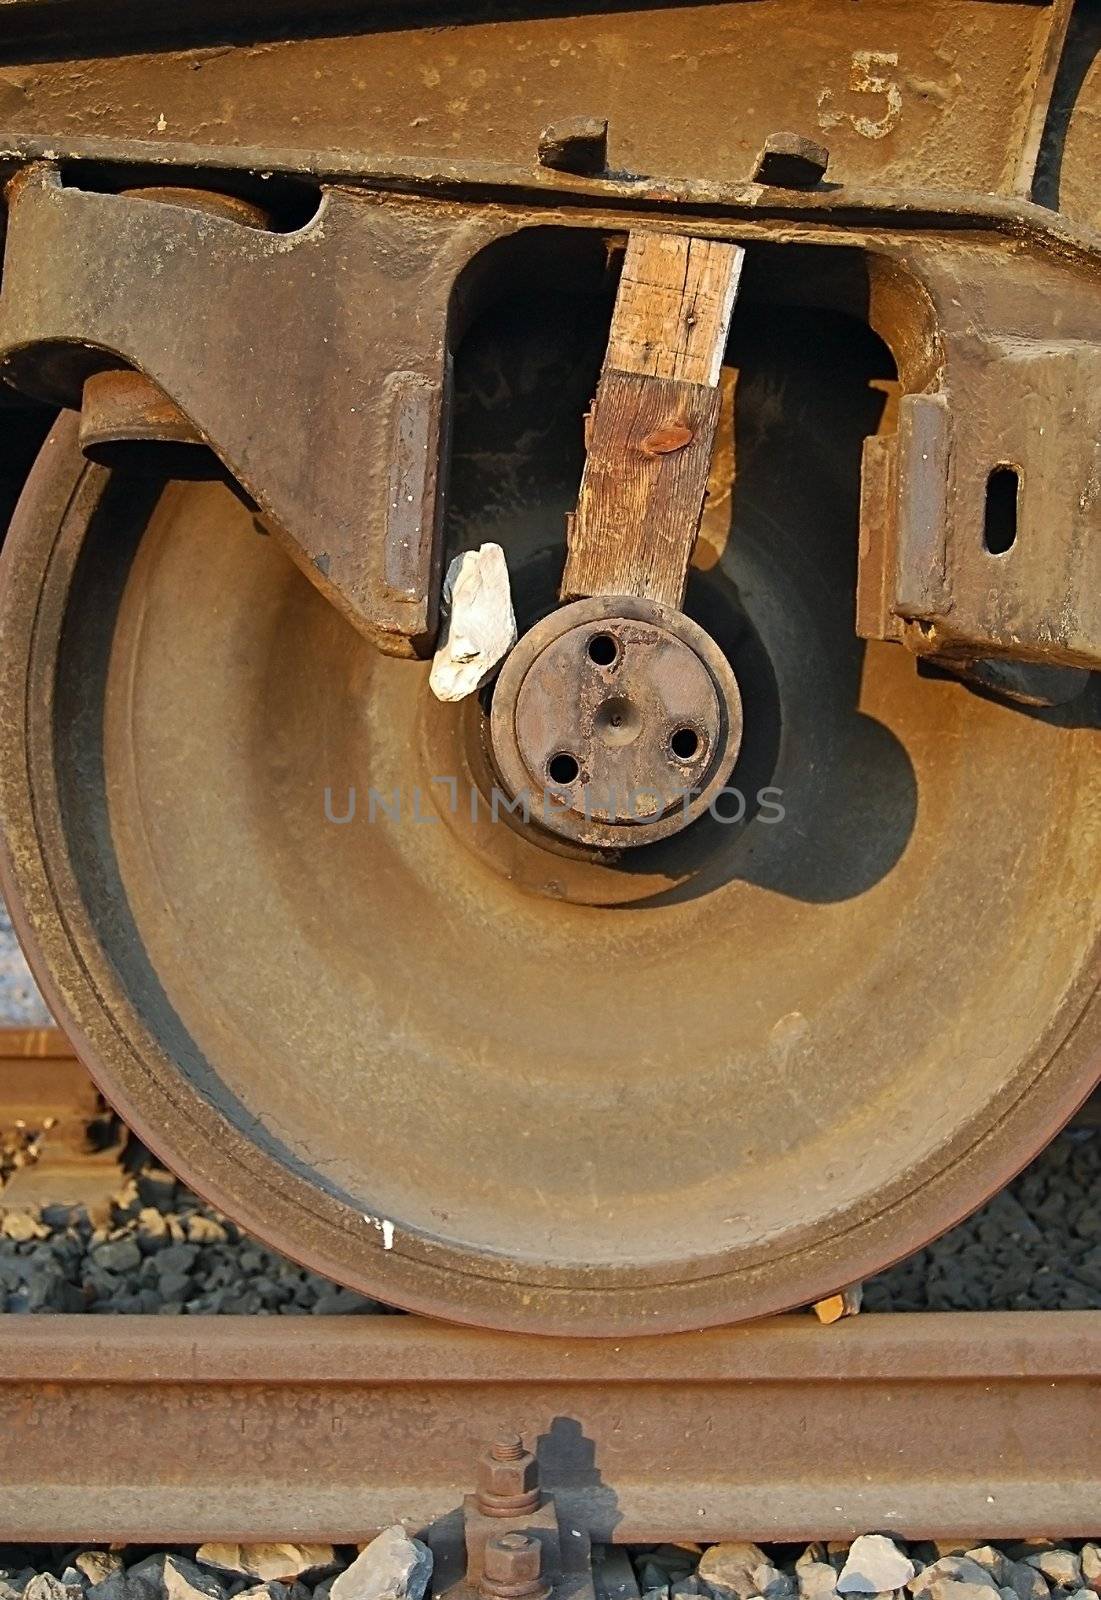 Freight wagon wedged wheel by varbenov